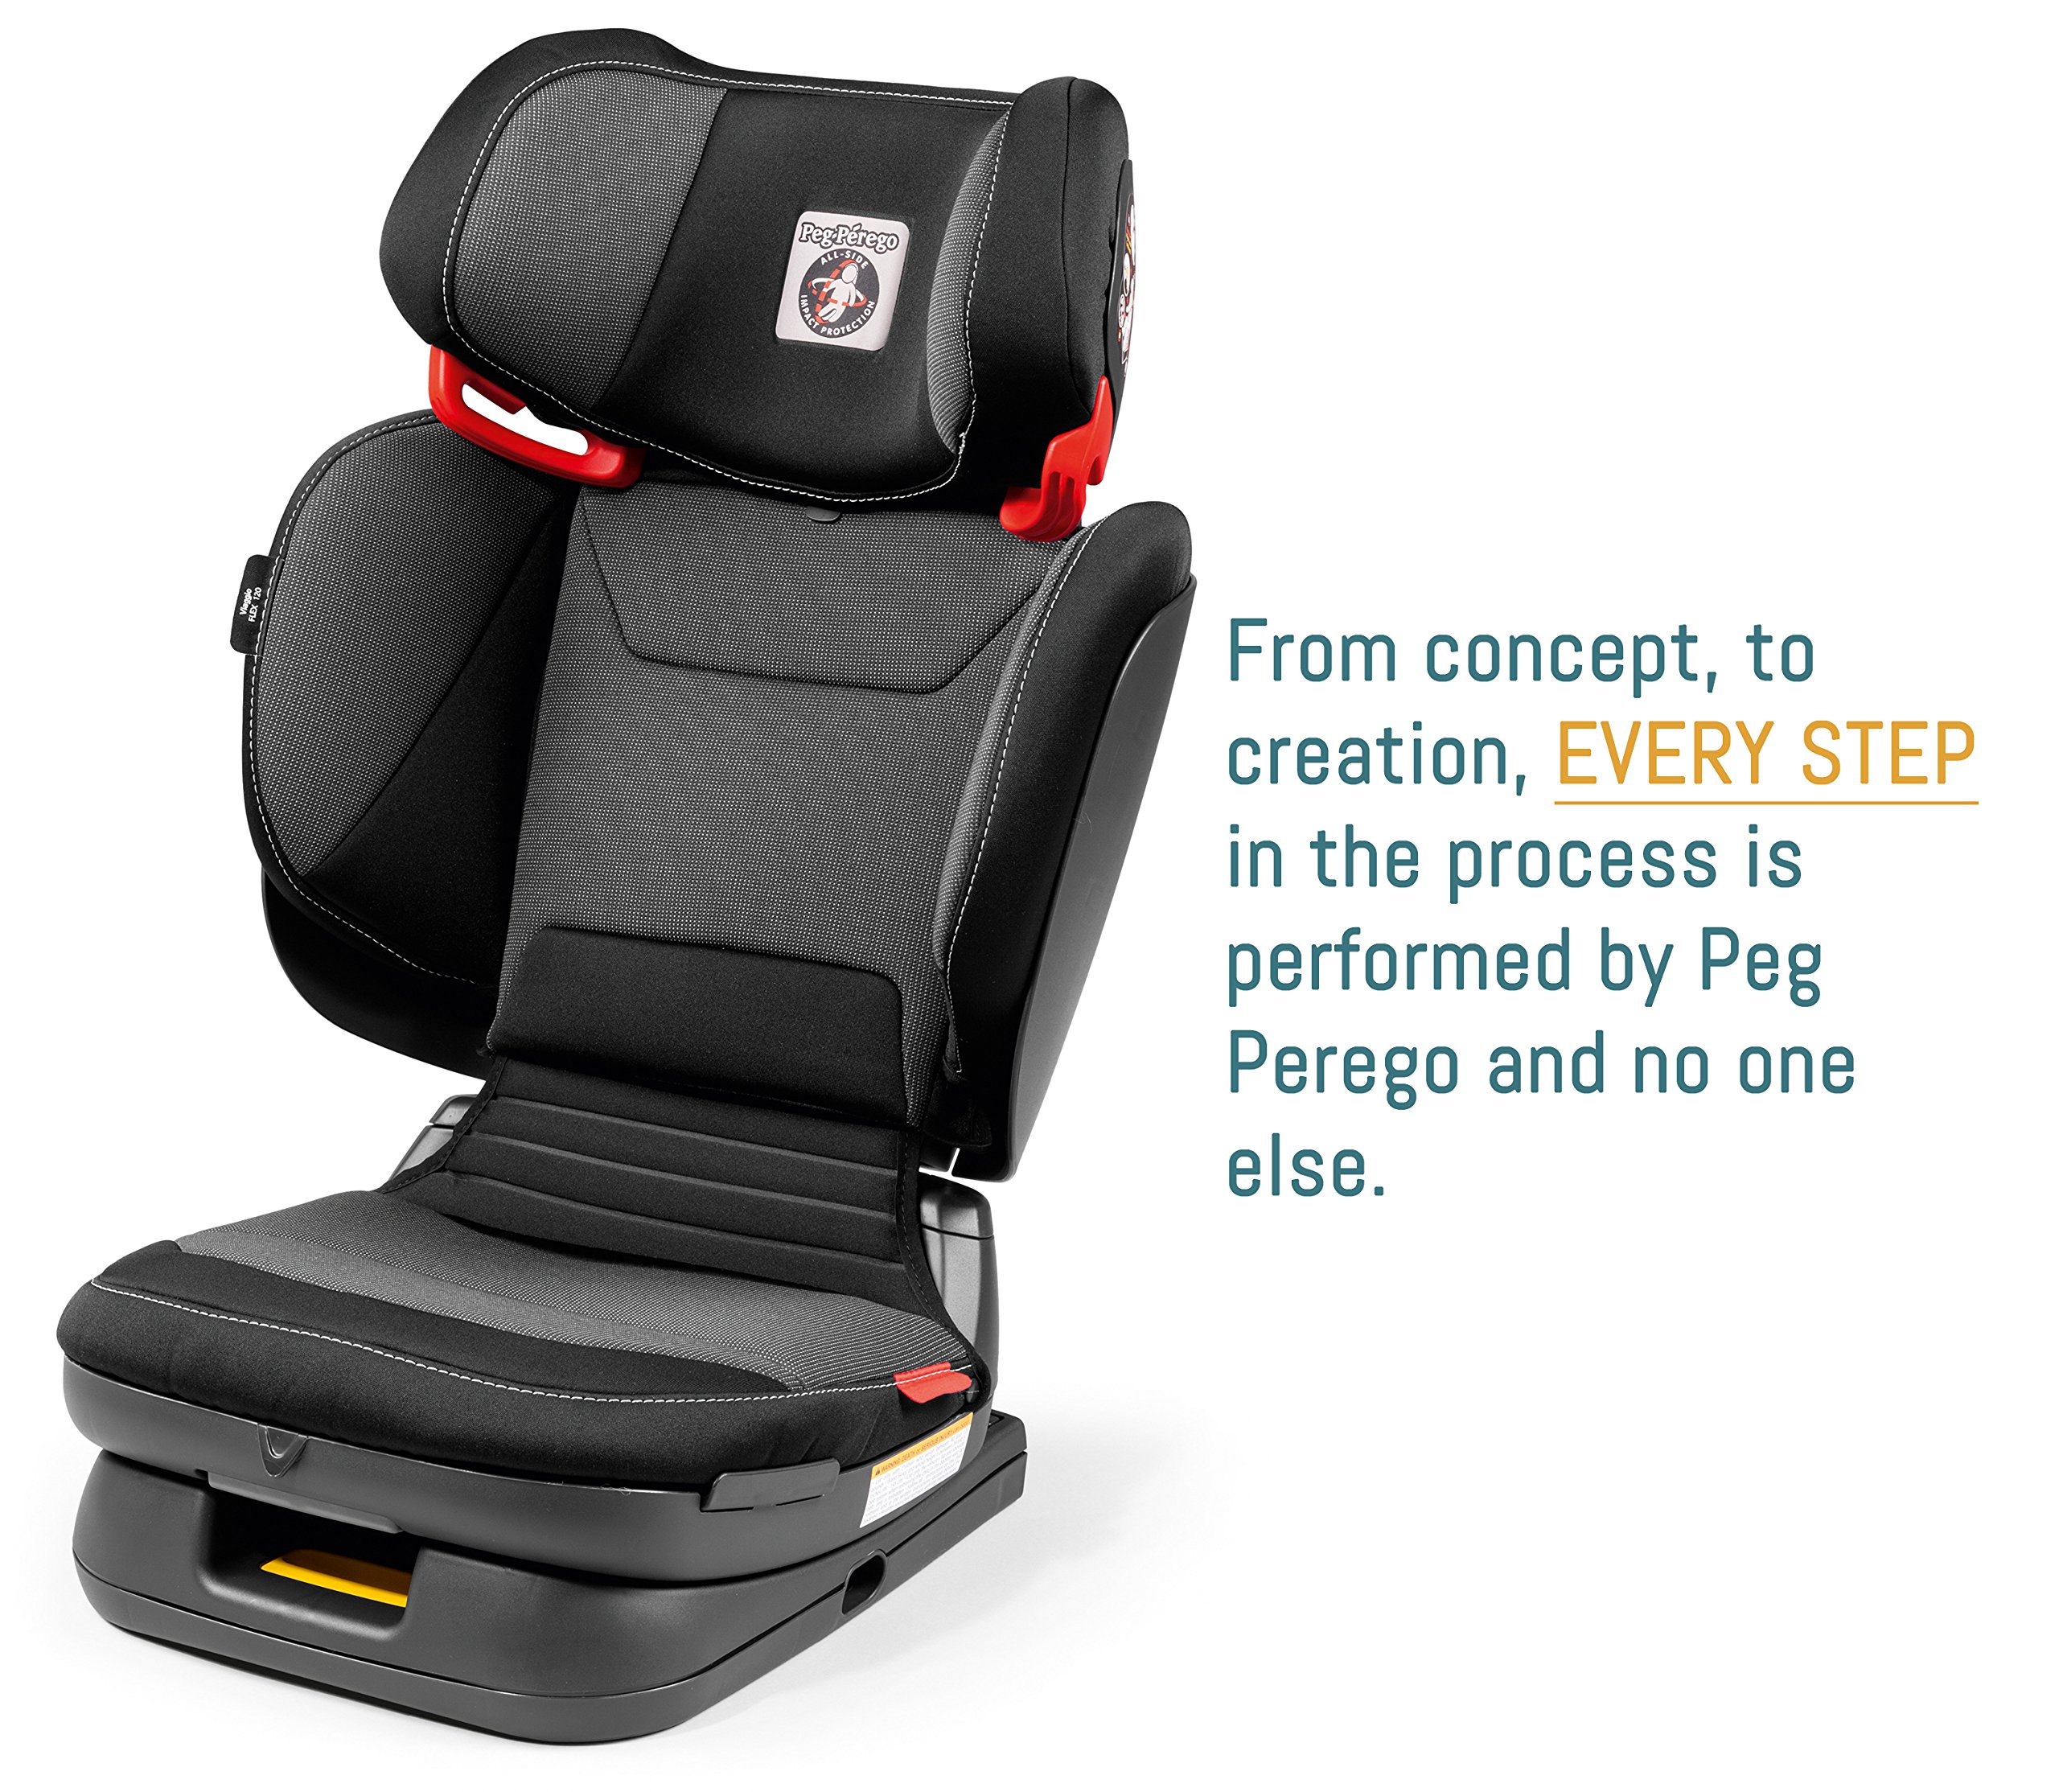 Viaggio Flex 120 - Booster Car Seat - for Children from 40 to 120 lbs - Made in Italy - Crystal Black (Black)